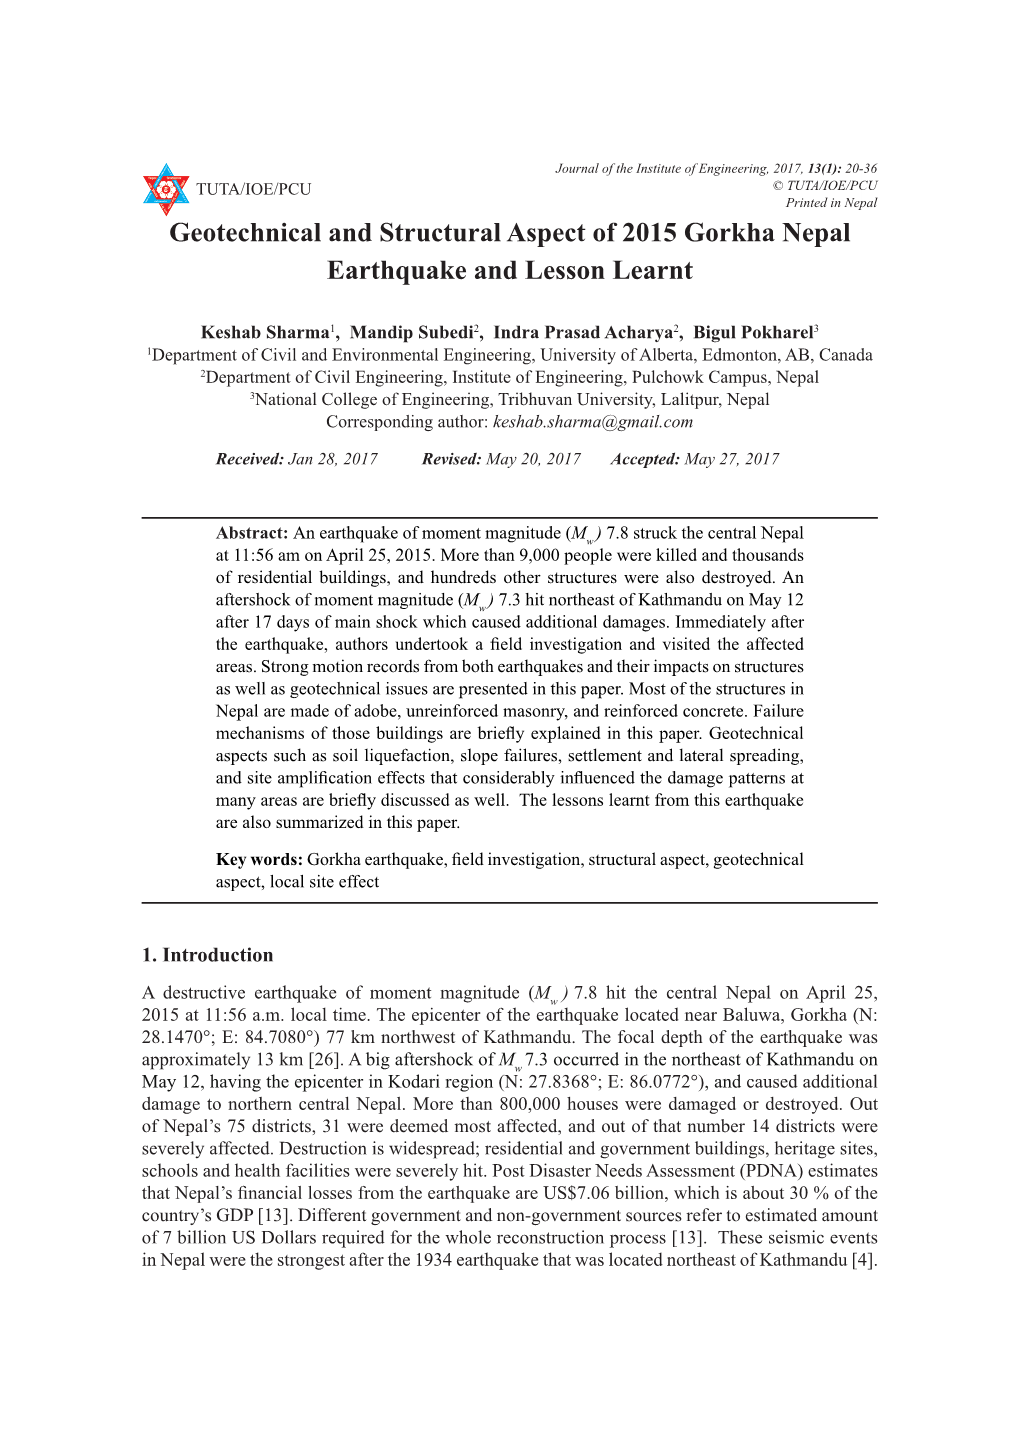 Geotechnical and Structural Aspect of 2015 Gorkha Nepal Earthquake and Lesson Learnt